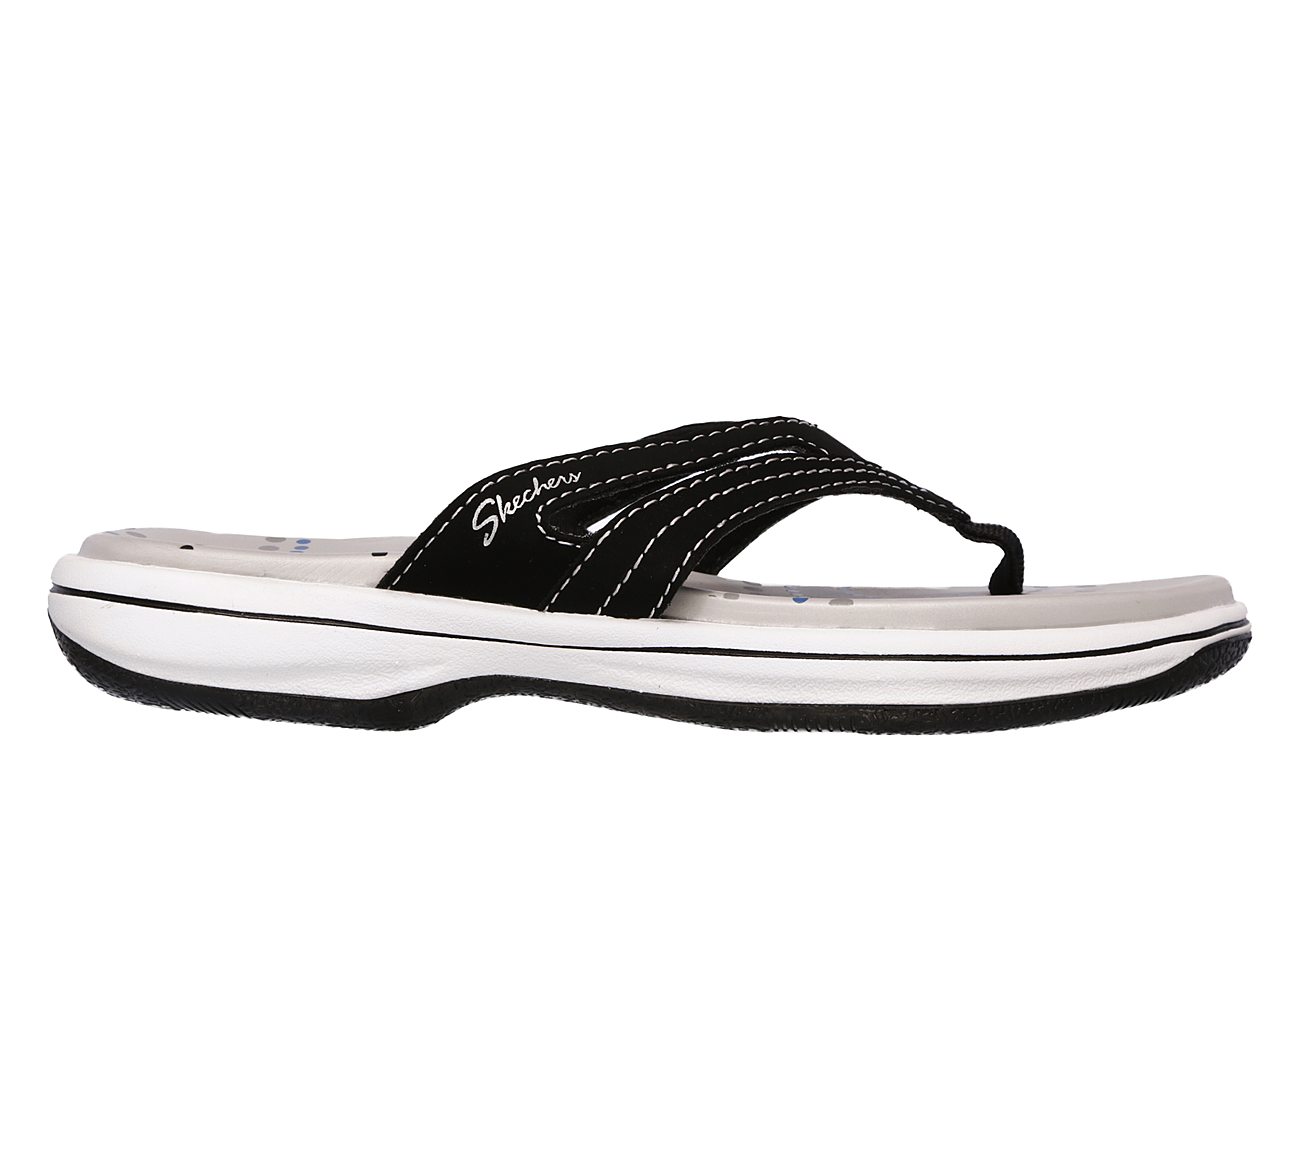 skechers relaxed step sandals Sale,up 